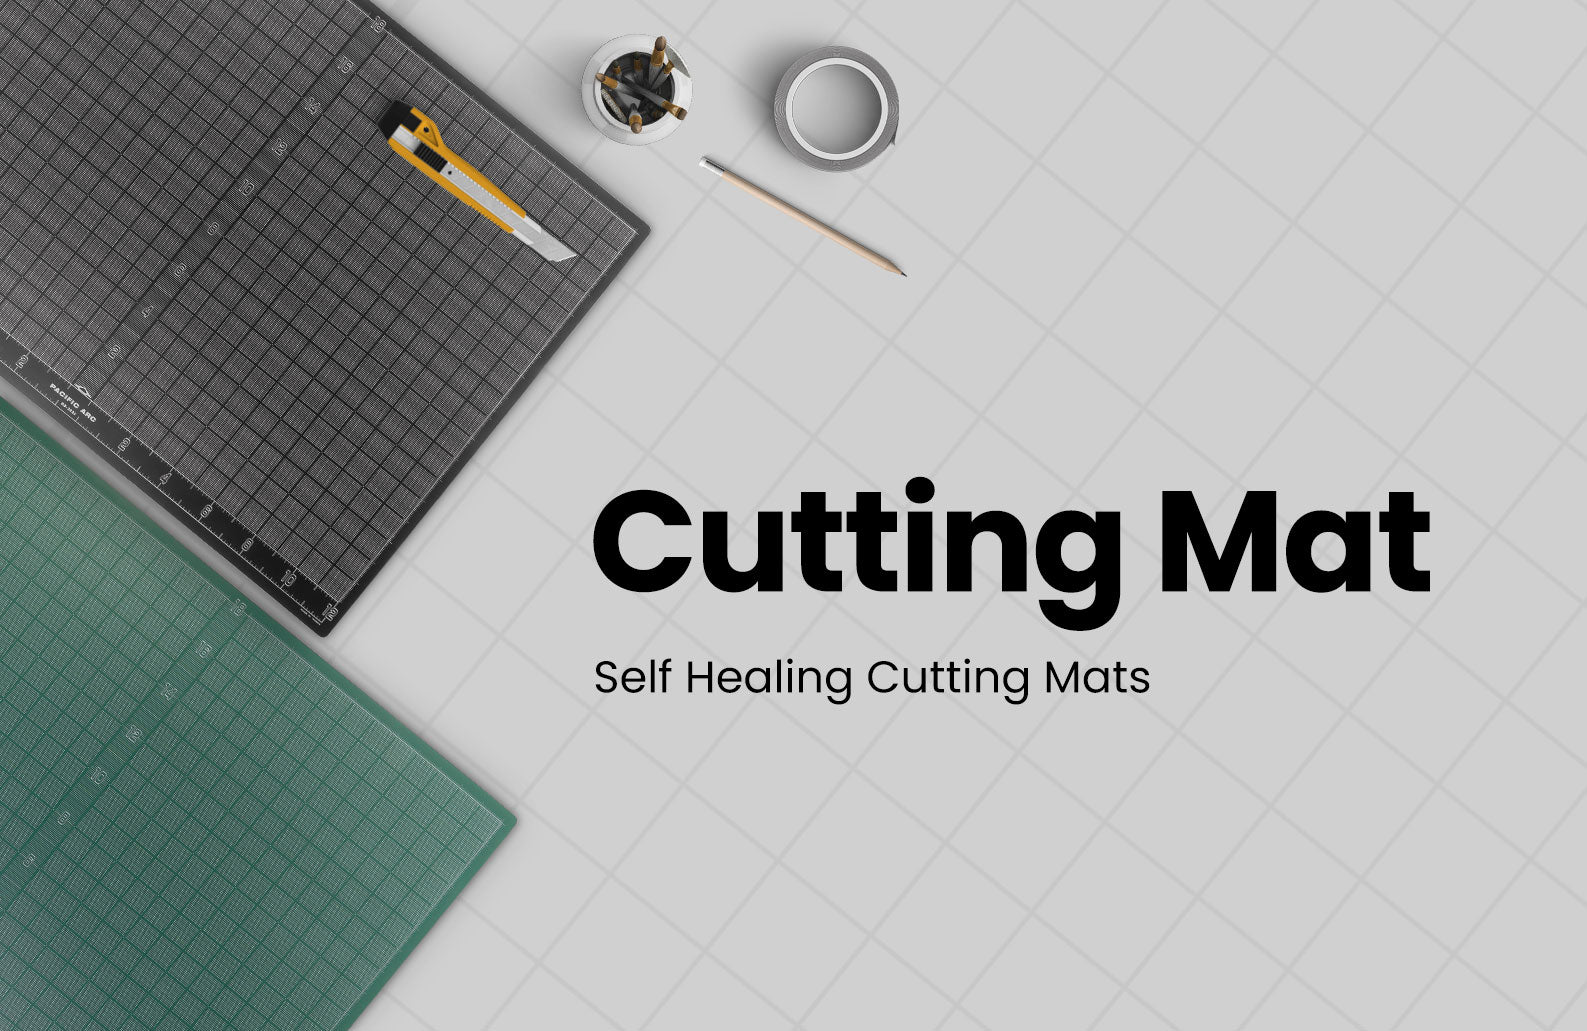 Reversible Self-Healing Graphic Cutting Mats by Pacific Arc